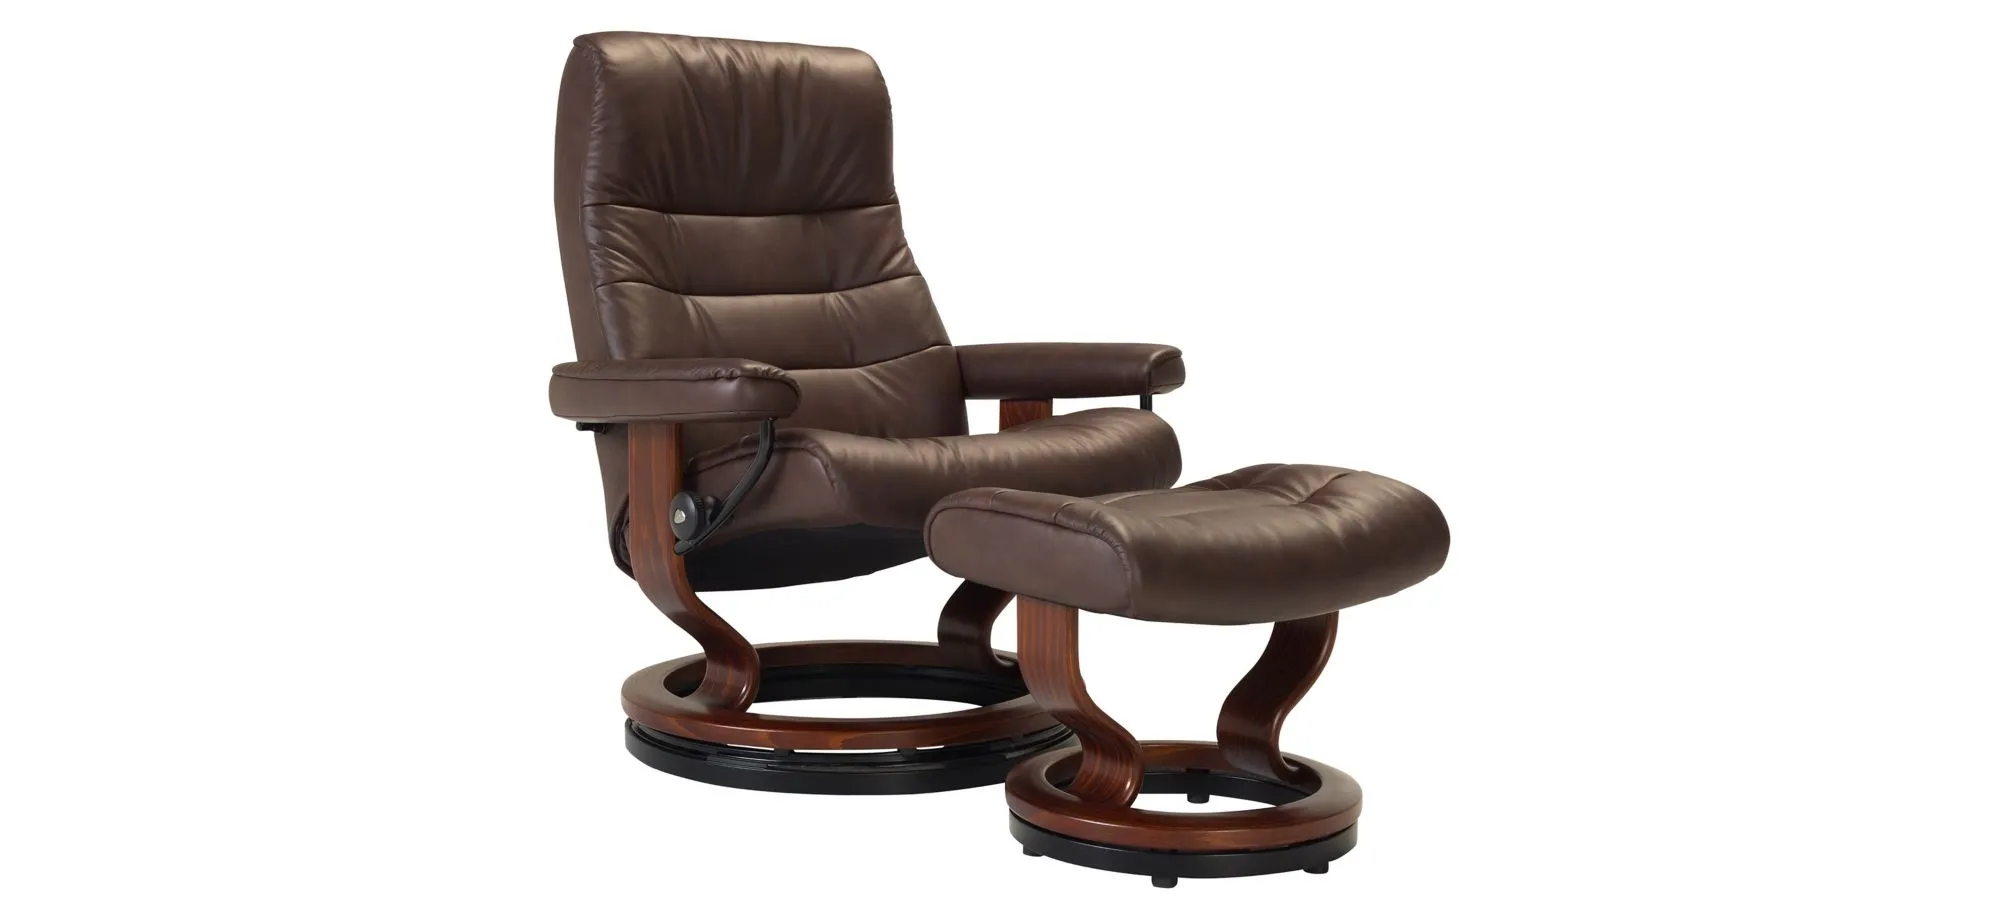 Stressless Opal Large Leather Reclining Chair and Ottoman w/ Rings in Paloma Chocolate by Stressless